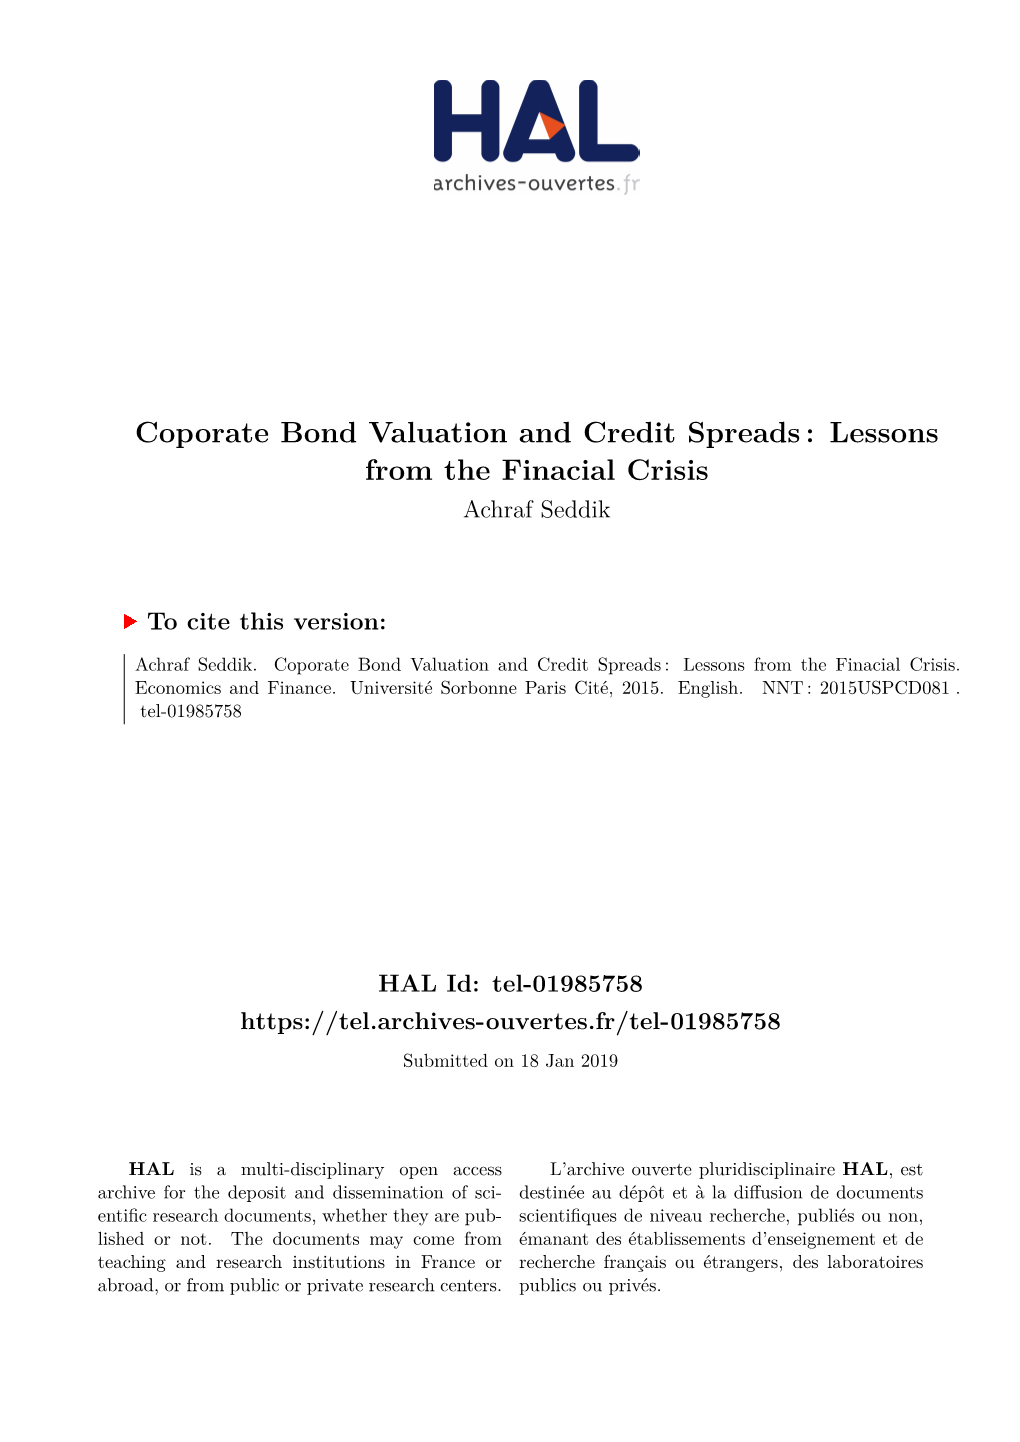 Coporate Bond Valuation and Credit Spreads : Lessons from the Finacial Crisis Achraf Seddik